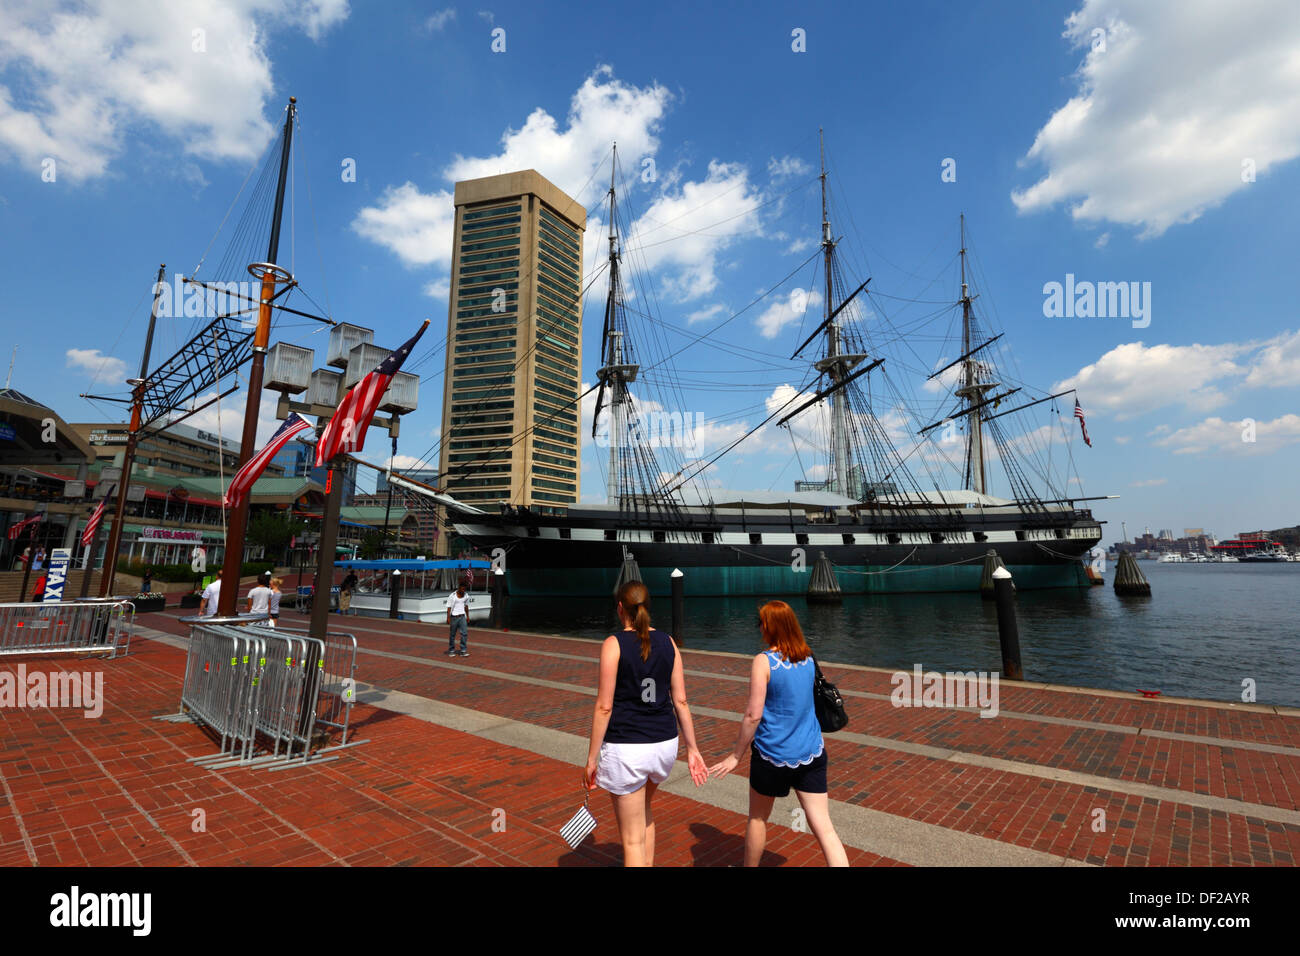 USS Constellation historic sailing ship, World Trade Center building in background, Inner Harbor, Baltimore City, Maryland, USA Stock Photo